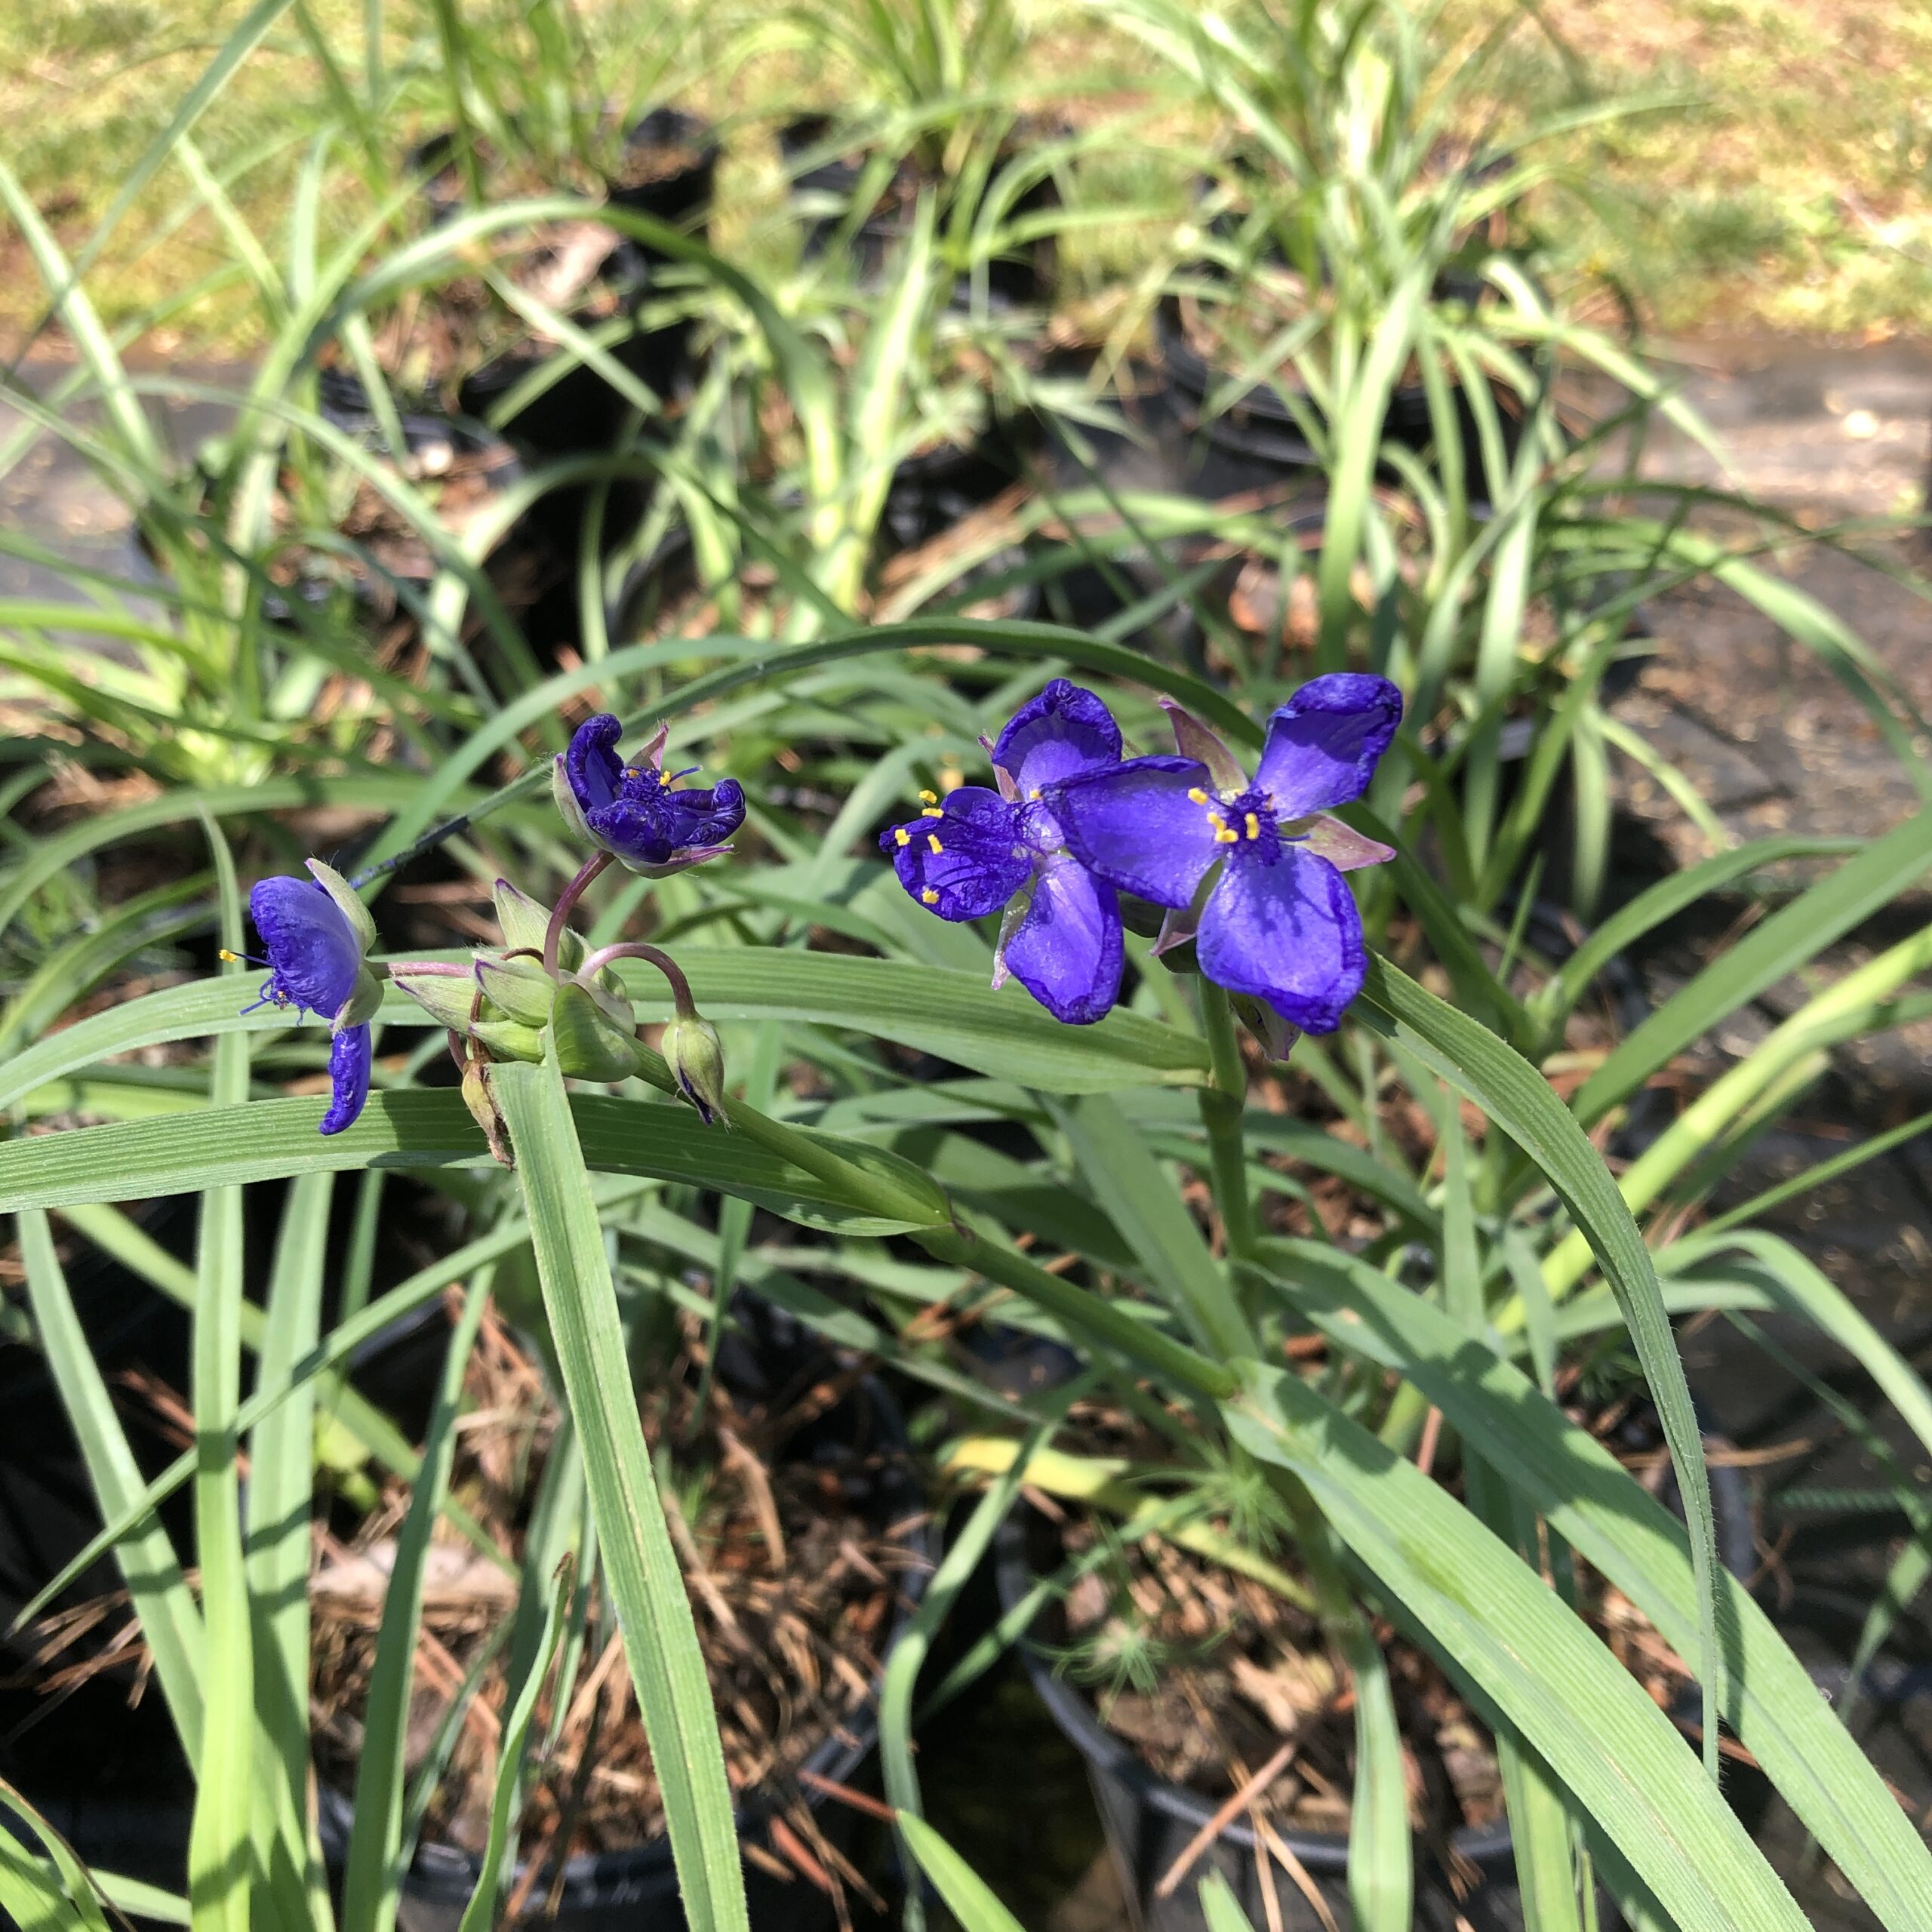 Violet flowers of Tradescantia ohiensis (Blue-Jacket Spiderwort) with their green, grass-like leaves in the background. There are multiple plants in pots in the image